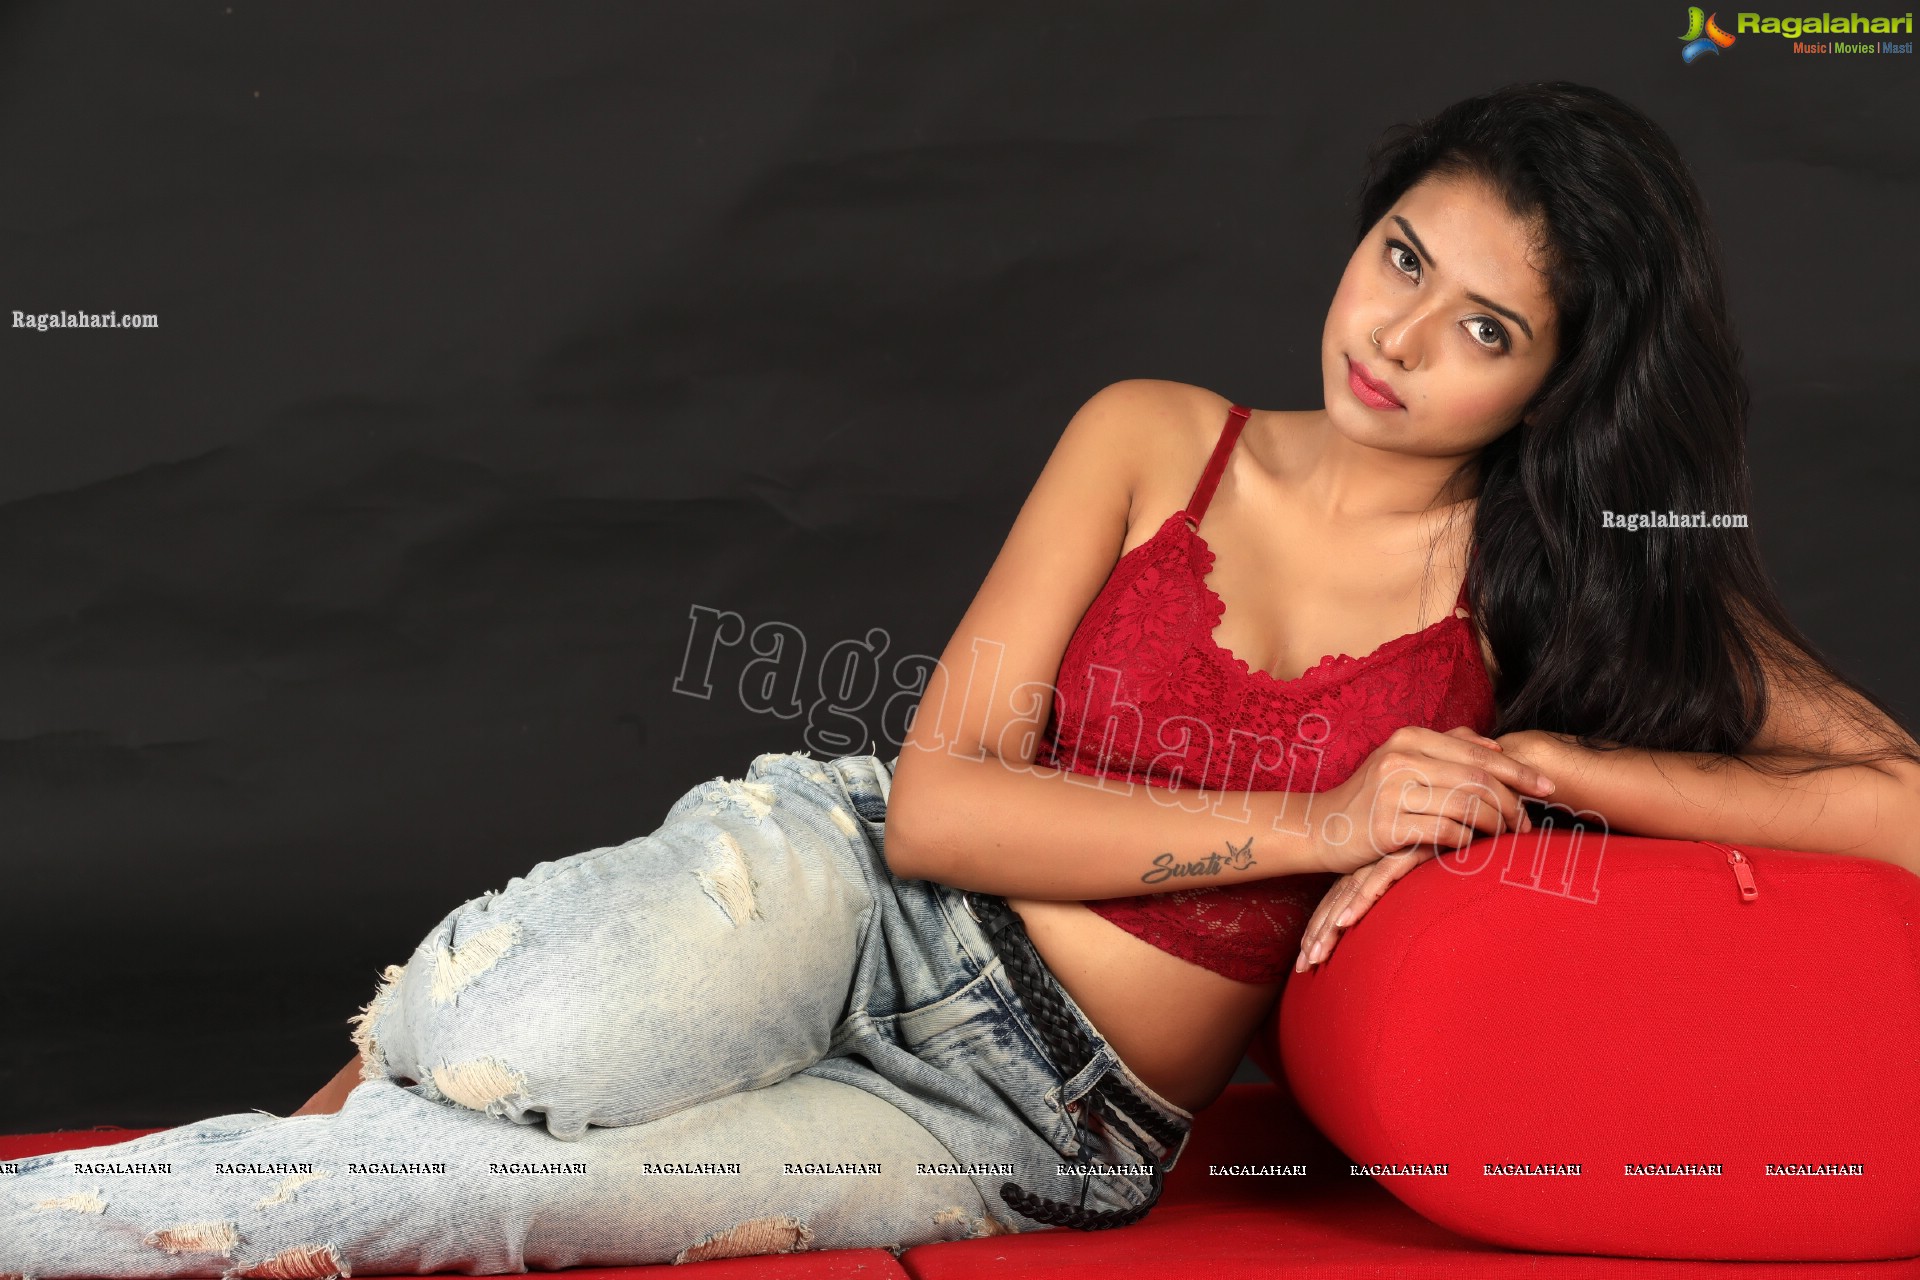 Swati Mandal in Red Lace Crop Top and Jeans Exclusive Photo Shoot